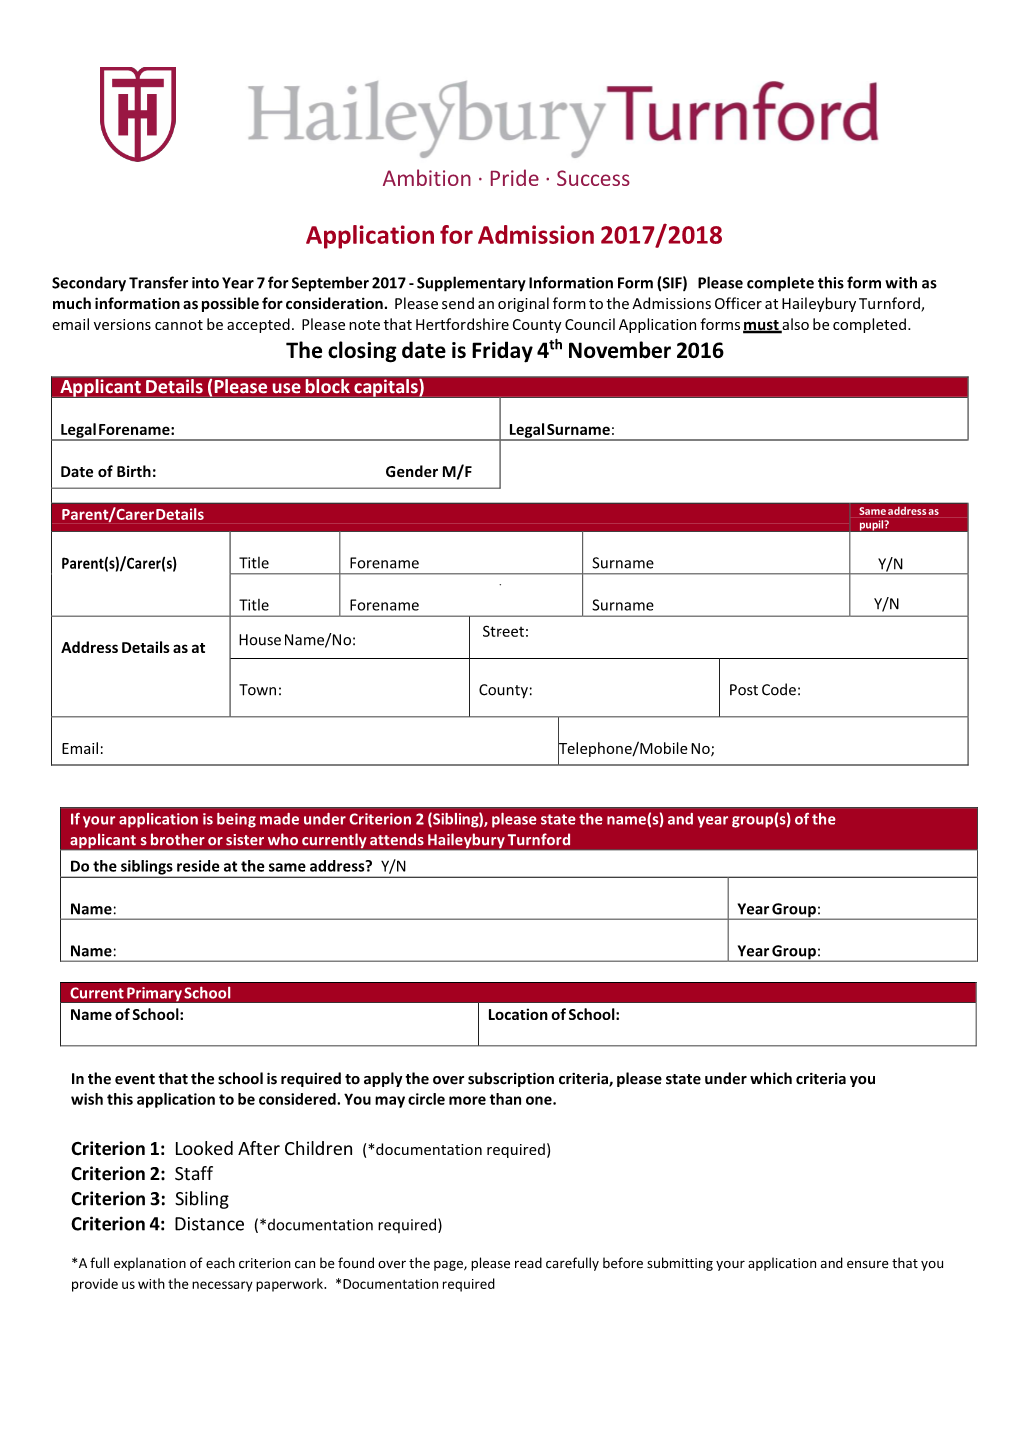 Application for Admission 2017/2018